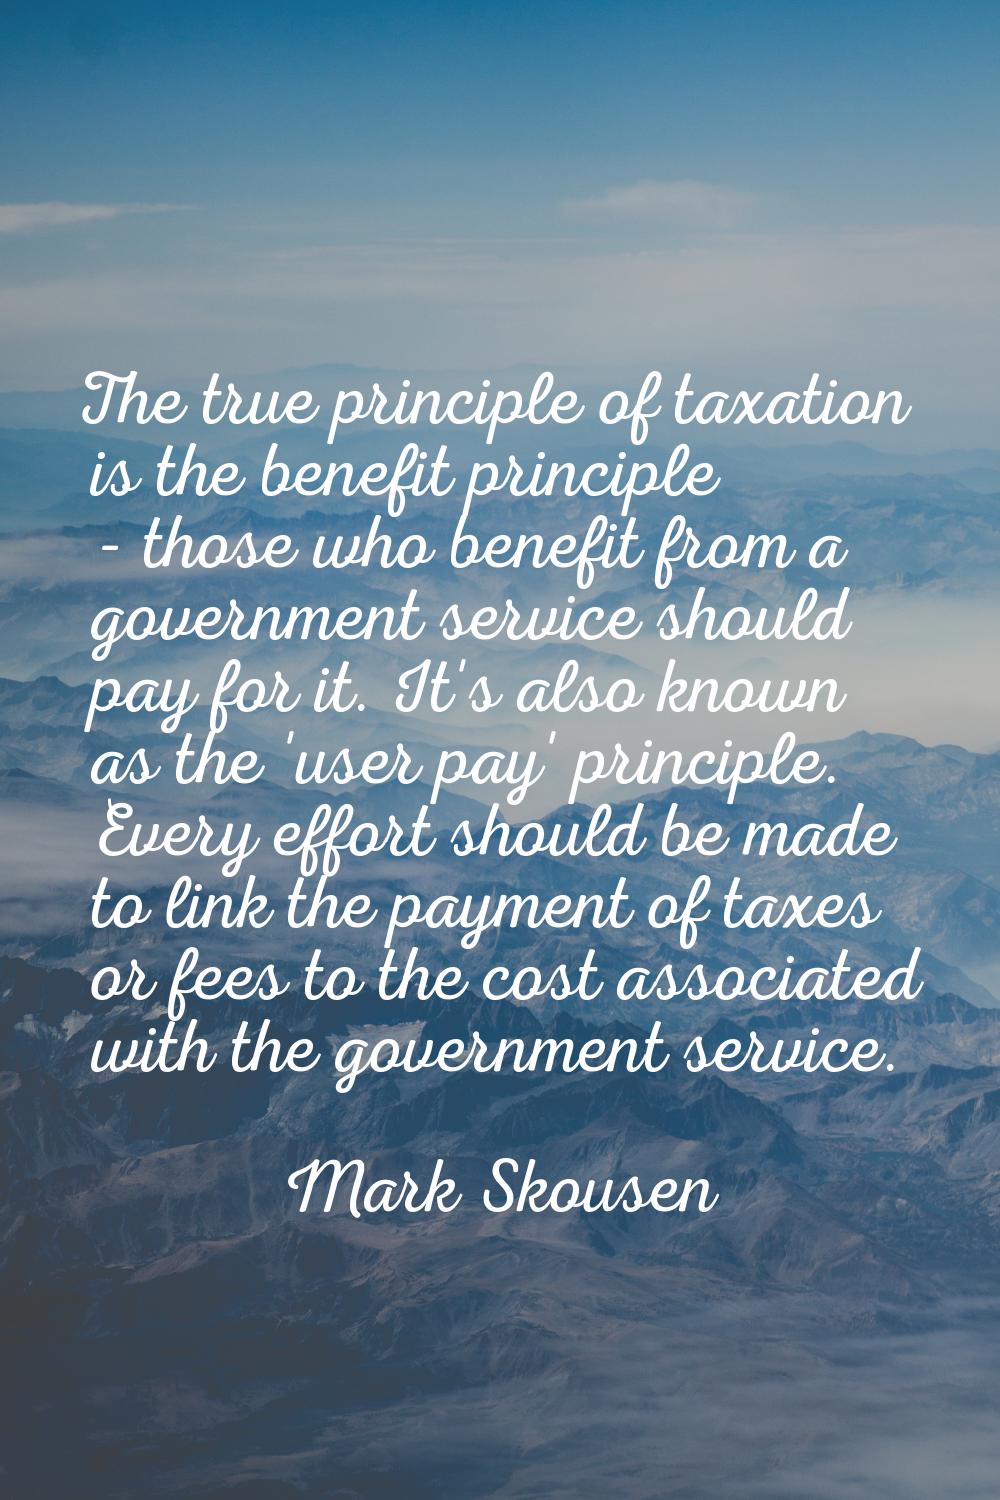 The true principle of taxation is the benefit principle - those who benefit from a government servi